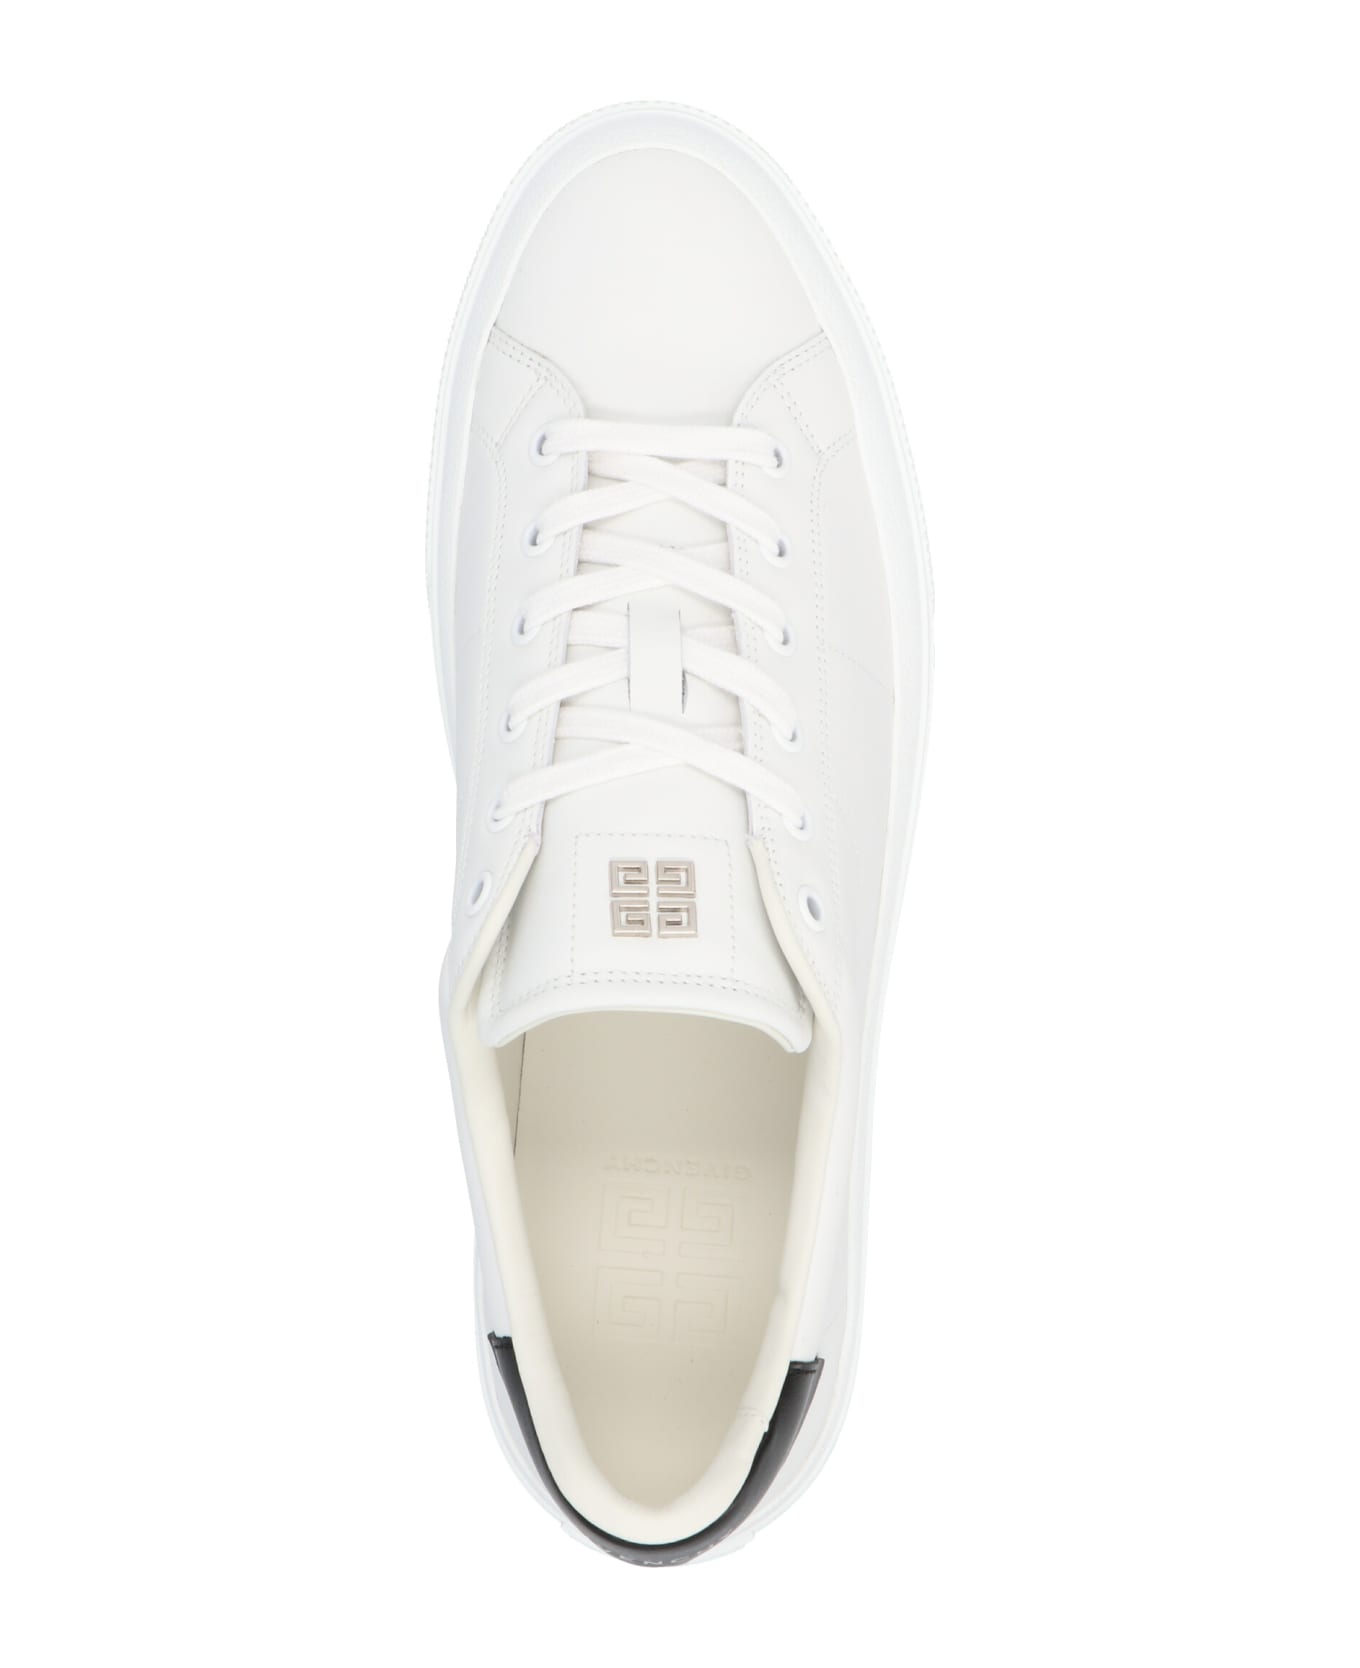 Givenchy 'city Sport' Sneakers - White/Black